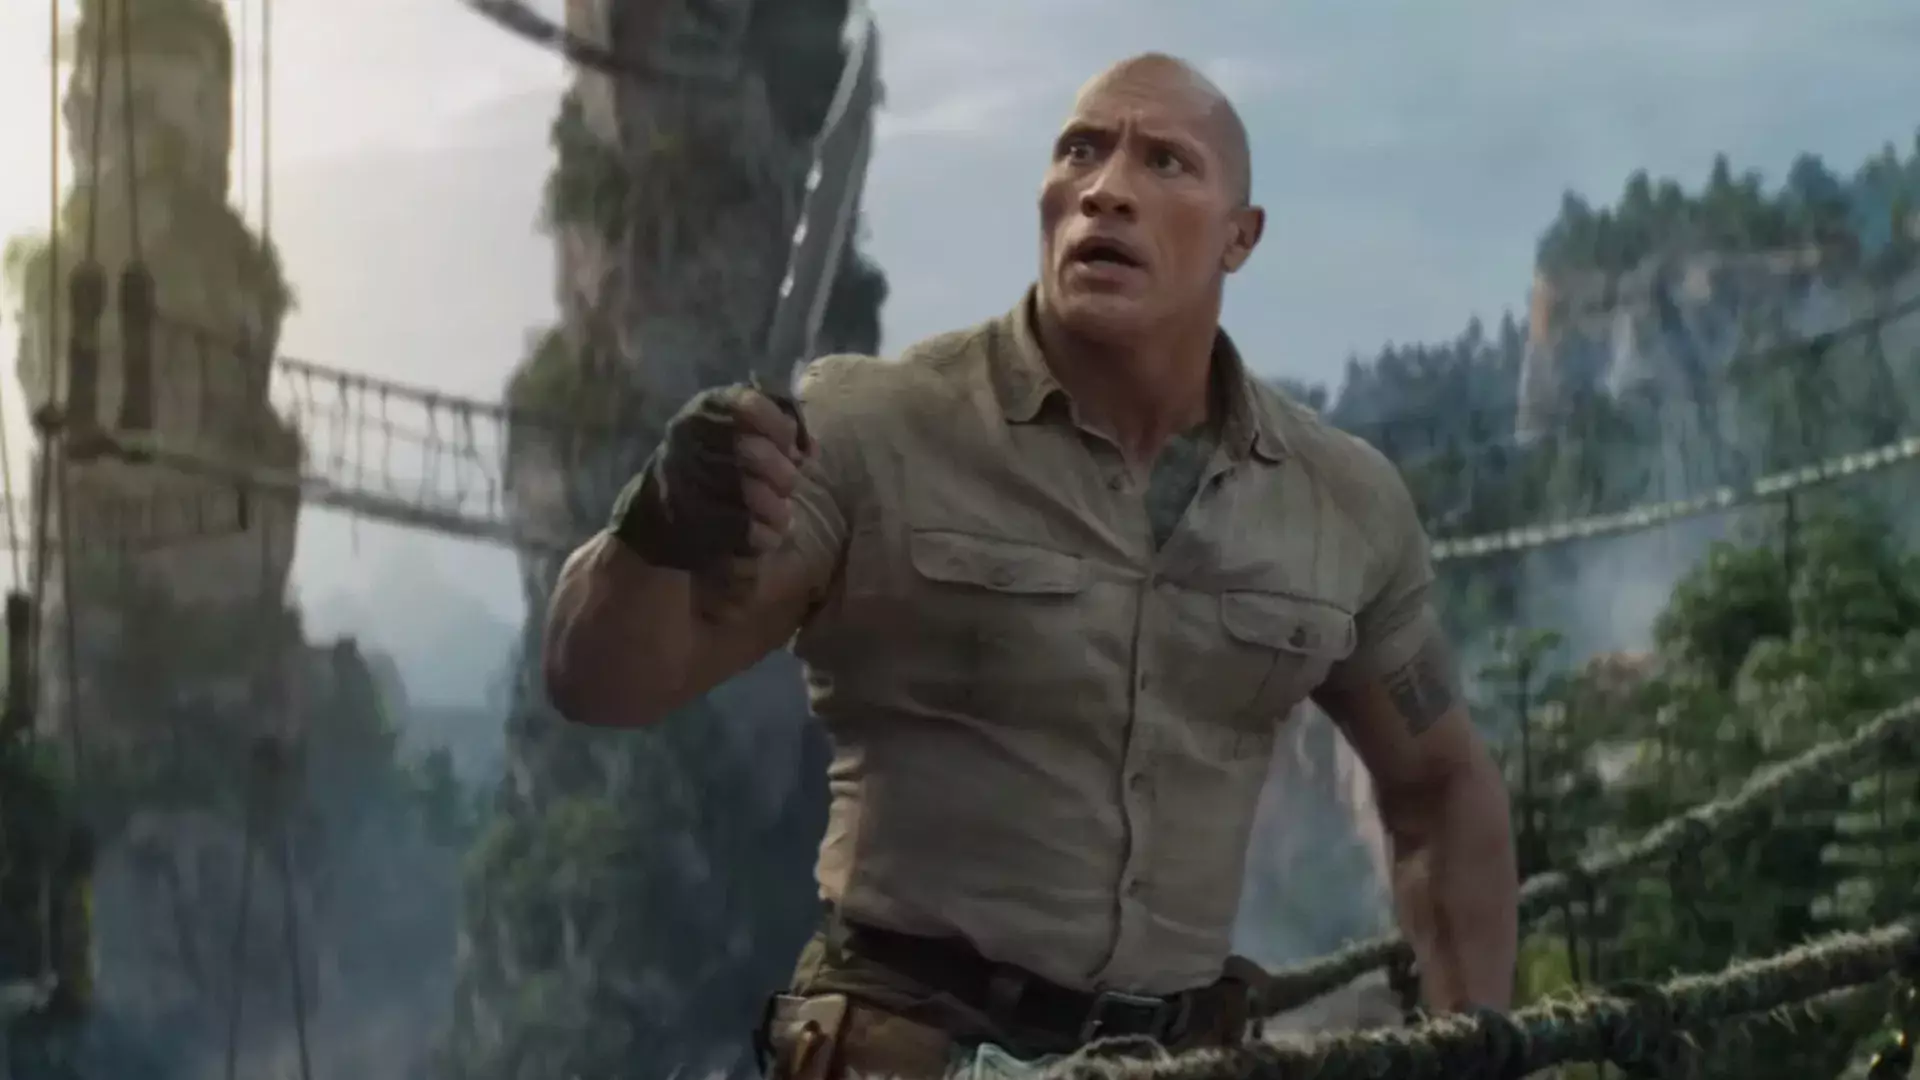 The new trailer for 'Jumanji: The Next Level' has finally been released. (